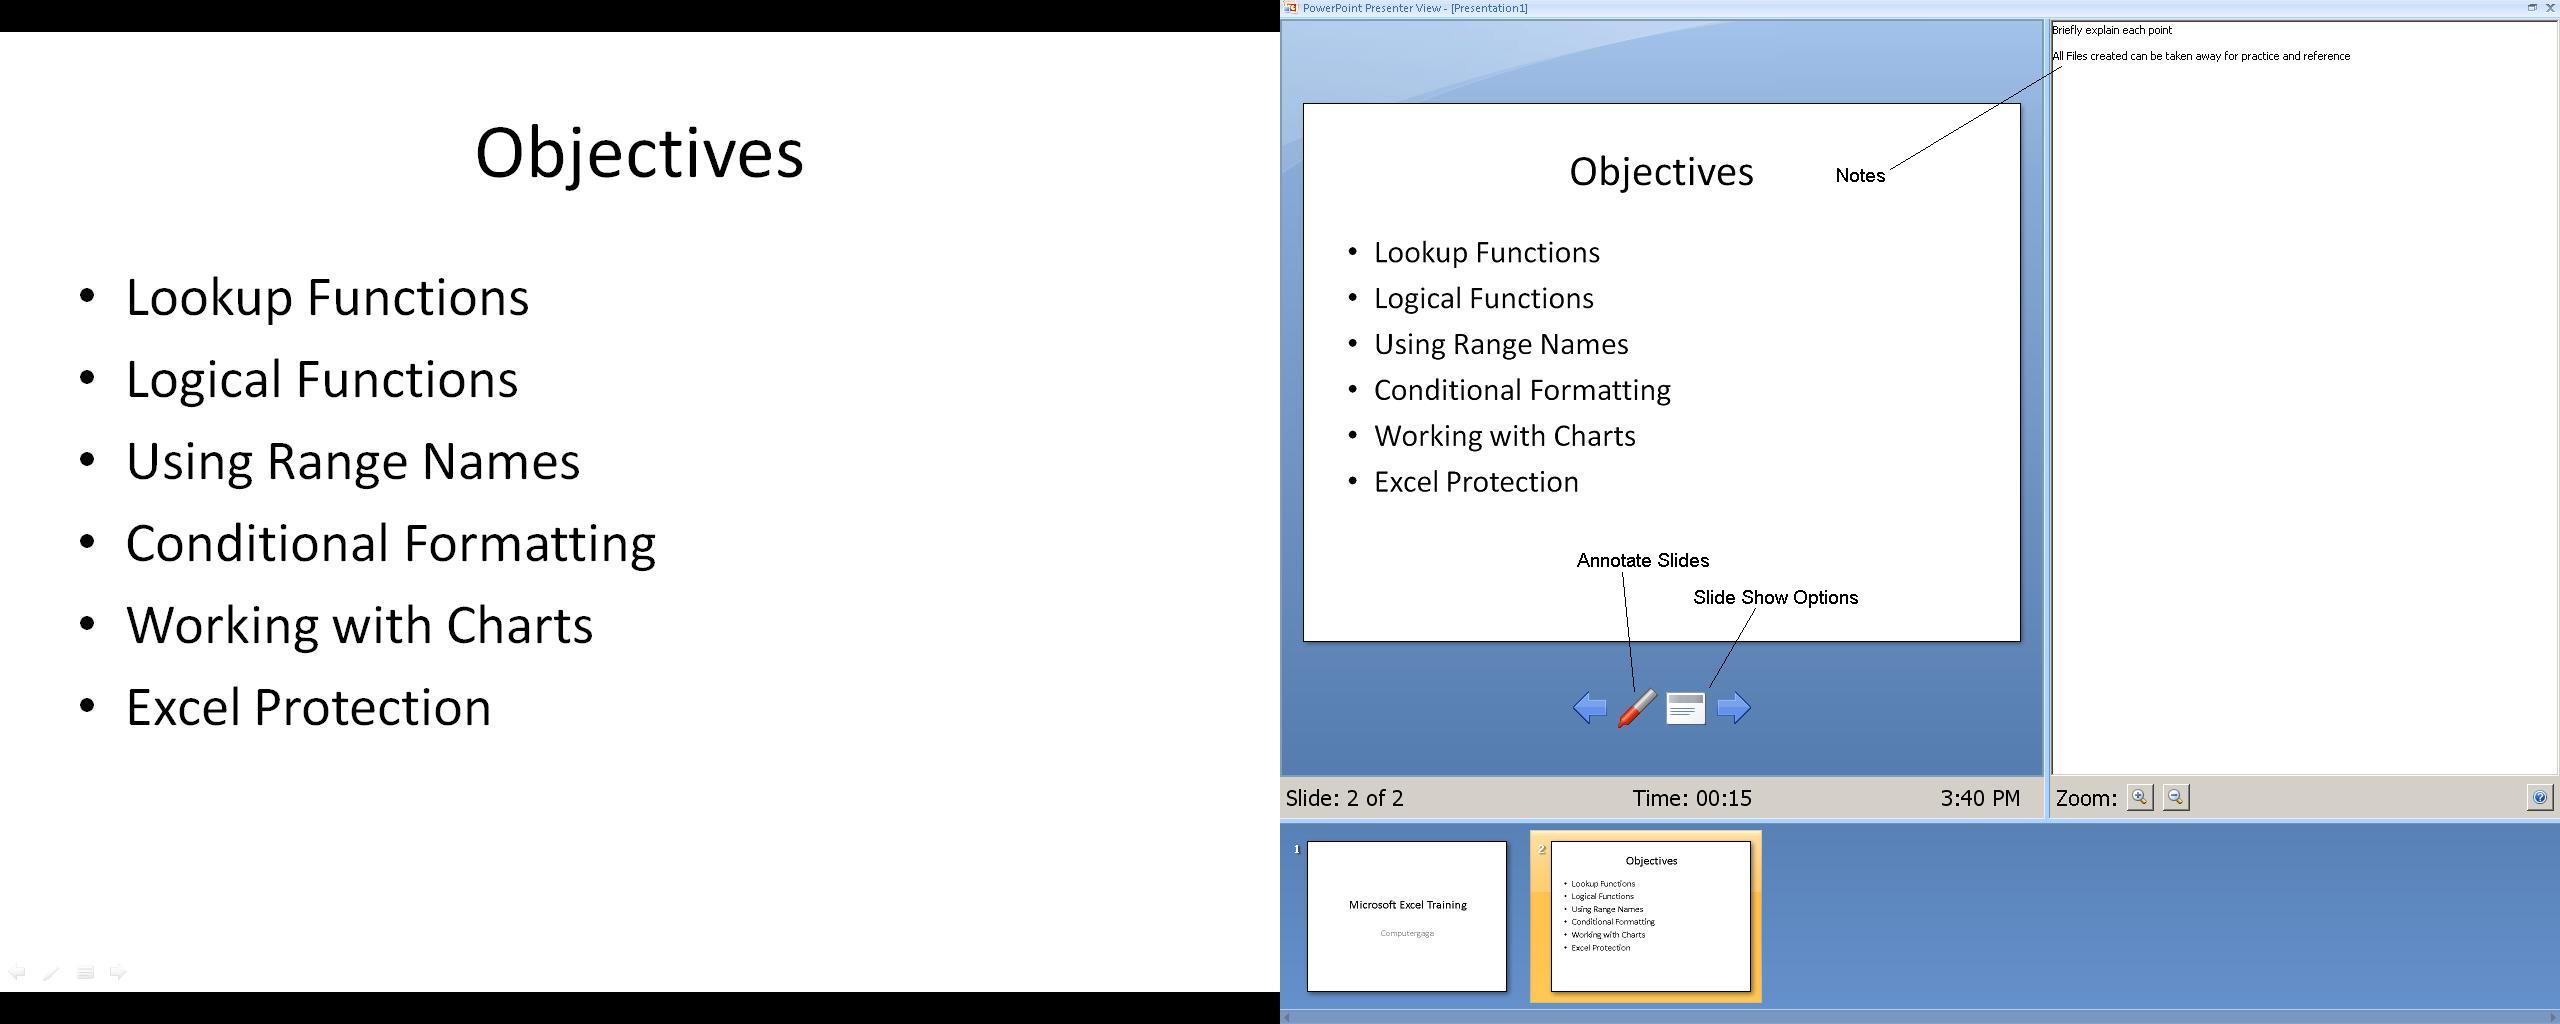 how to use presenter view in powerpoint 2010